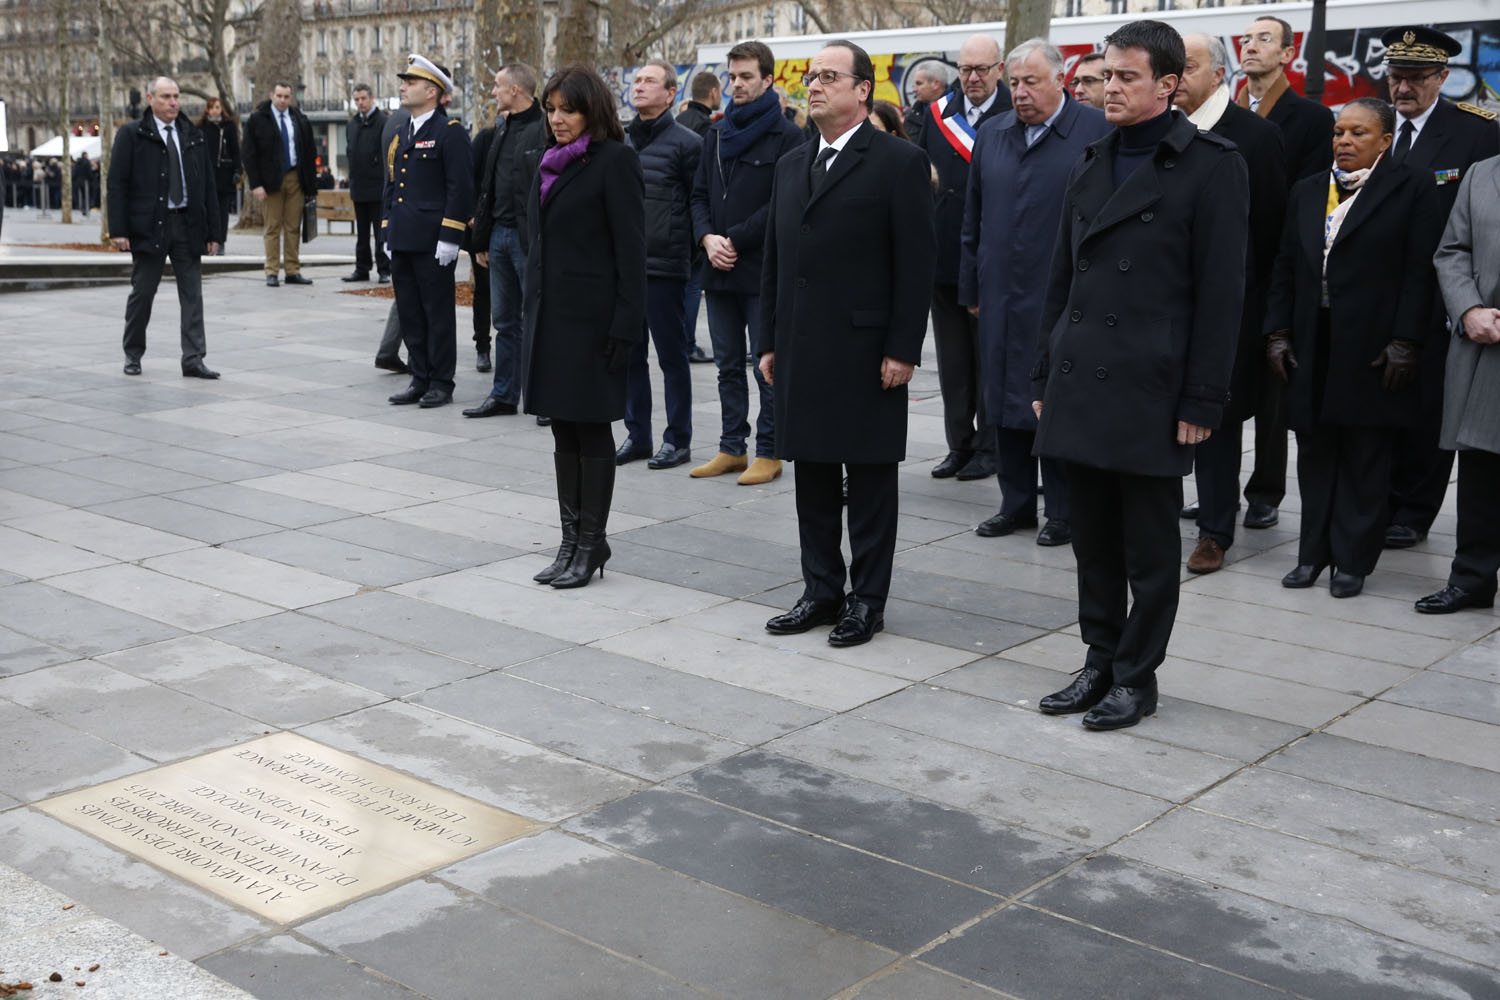 French President Francois Hollande (C), Prime Minister Manuel Valls (R) and Paris Mayor Anne Hidalgo (L) pay respect after unveiling a commemorative plaque during a ceremony held, on January 10, 2016 to mark a year since 1.6 million people thronged the French capital in a show of unity after attacks on the Charlie Hebdo newspaper and a Jewish supermarket. Just as it was last year, the vast Place de la Republique will be the focus of the gathering as people reiterate their support for freedom of expression and remember the other victims of what would become a year of jihadist outrages in France, culminating in the November 13 coordinated shootings and suicide bombings that killed 130 people and were claimed by the Islamic State (IS) group. / AFP / POOL / PHILIPPE WOJAZER